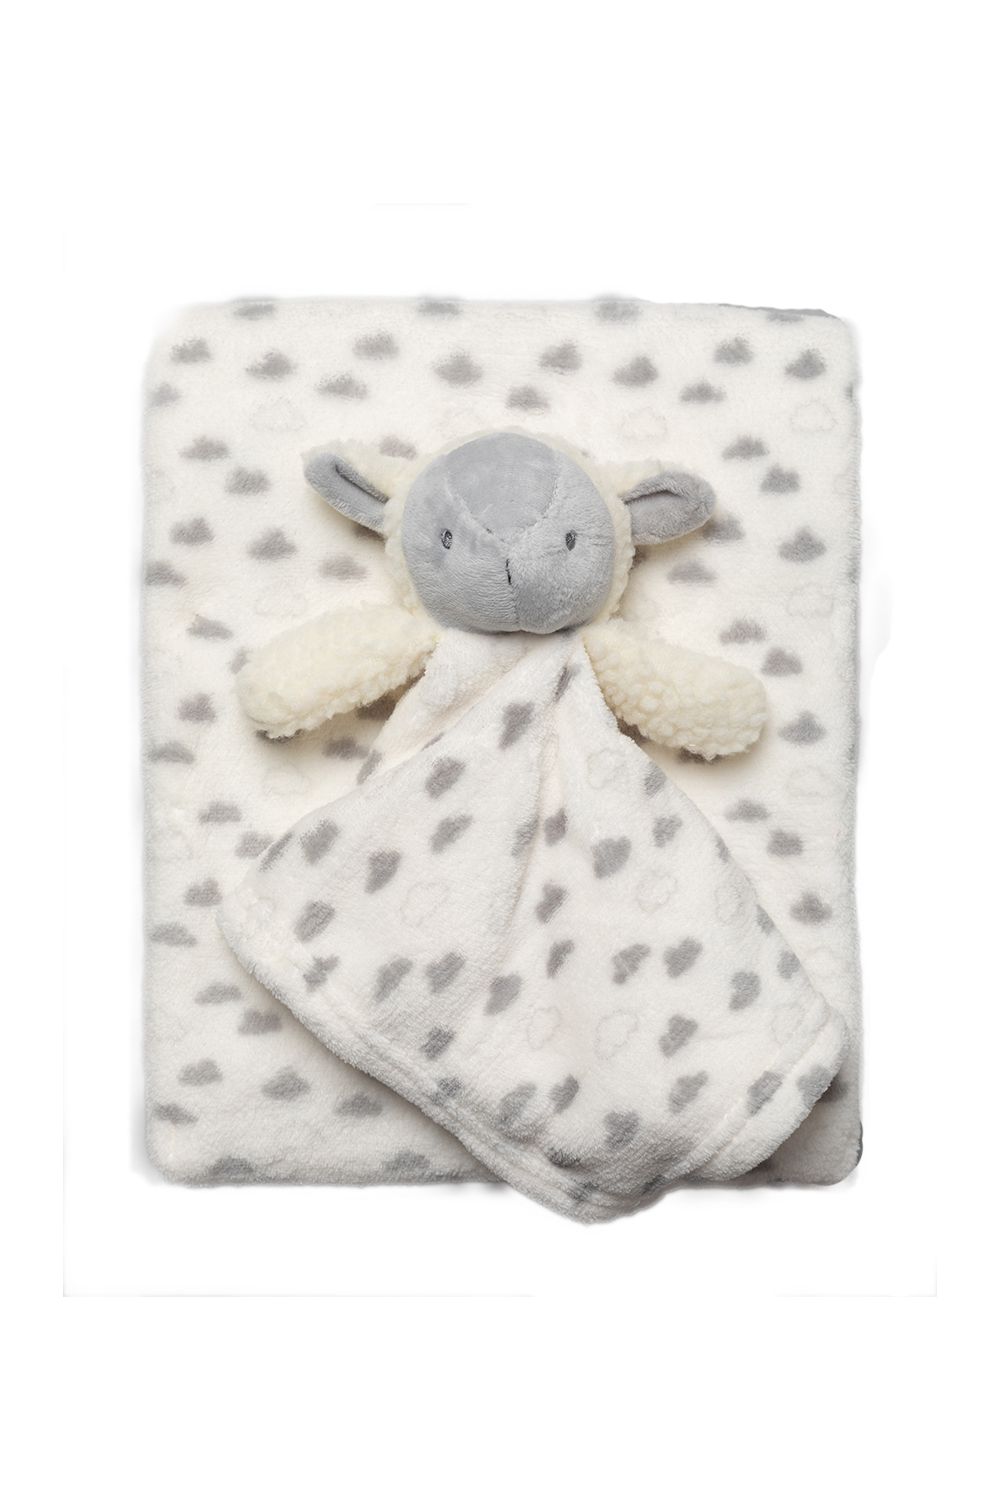 This adorable Snuggle Tots comforter and blanket set make the perfect gift for the little one in your life. The two-piece set features a beautiful, fluffy blanket with a grey cloud print all over, and a comforter with the same print with a cuddly sheep toy attached. This set makes a lovely baby shower present.